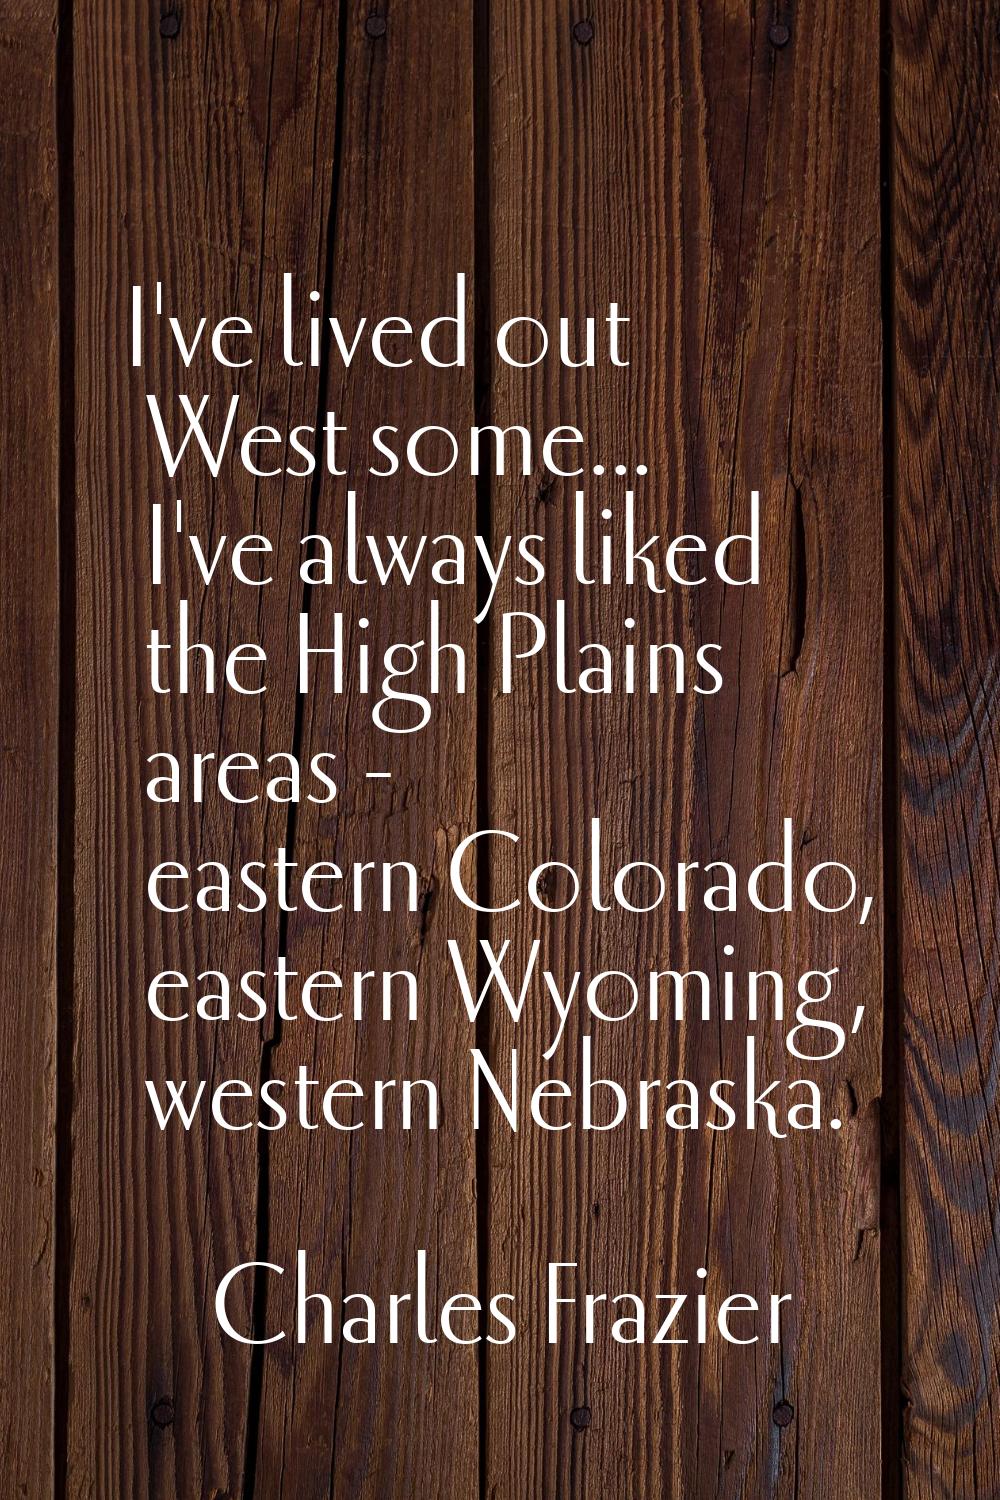 I've lived out West some... I've always liked the High Plains areas - eastern Colorado, eastern Wyo